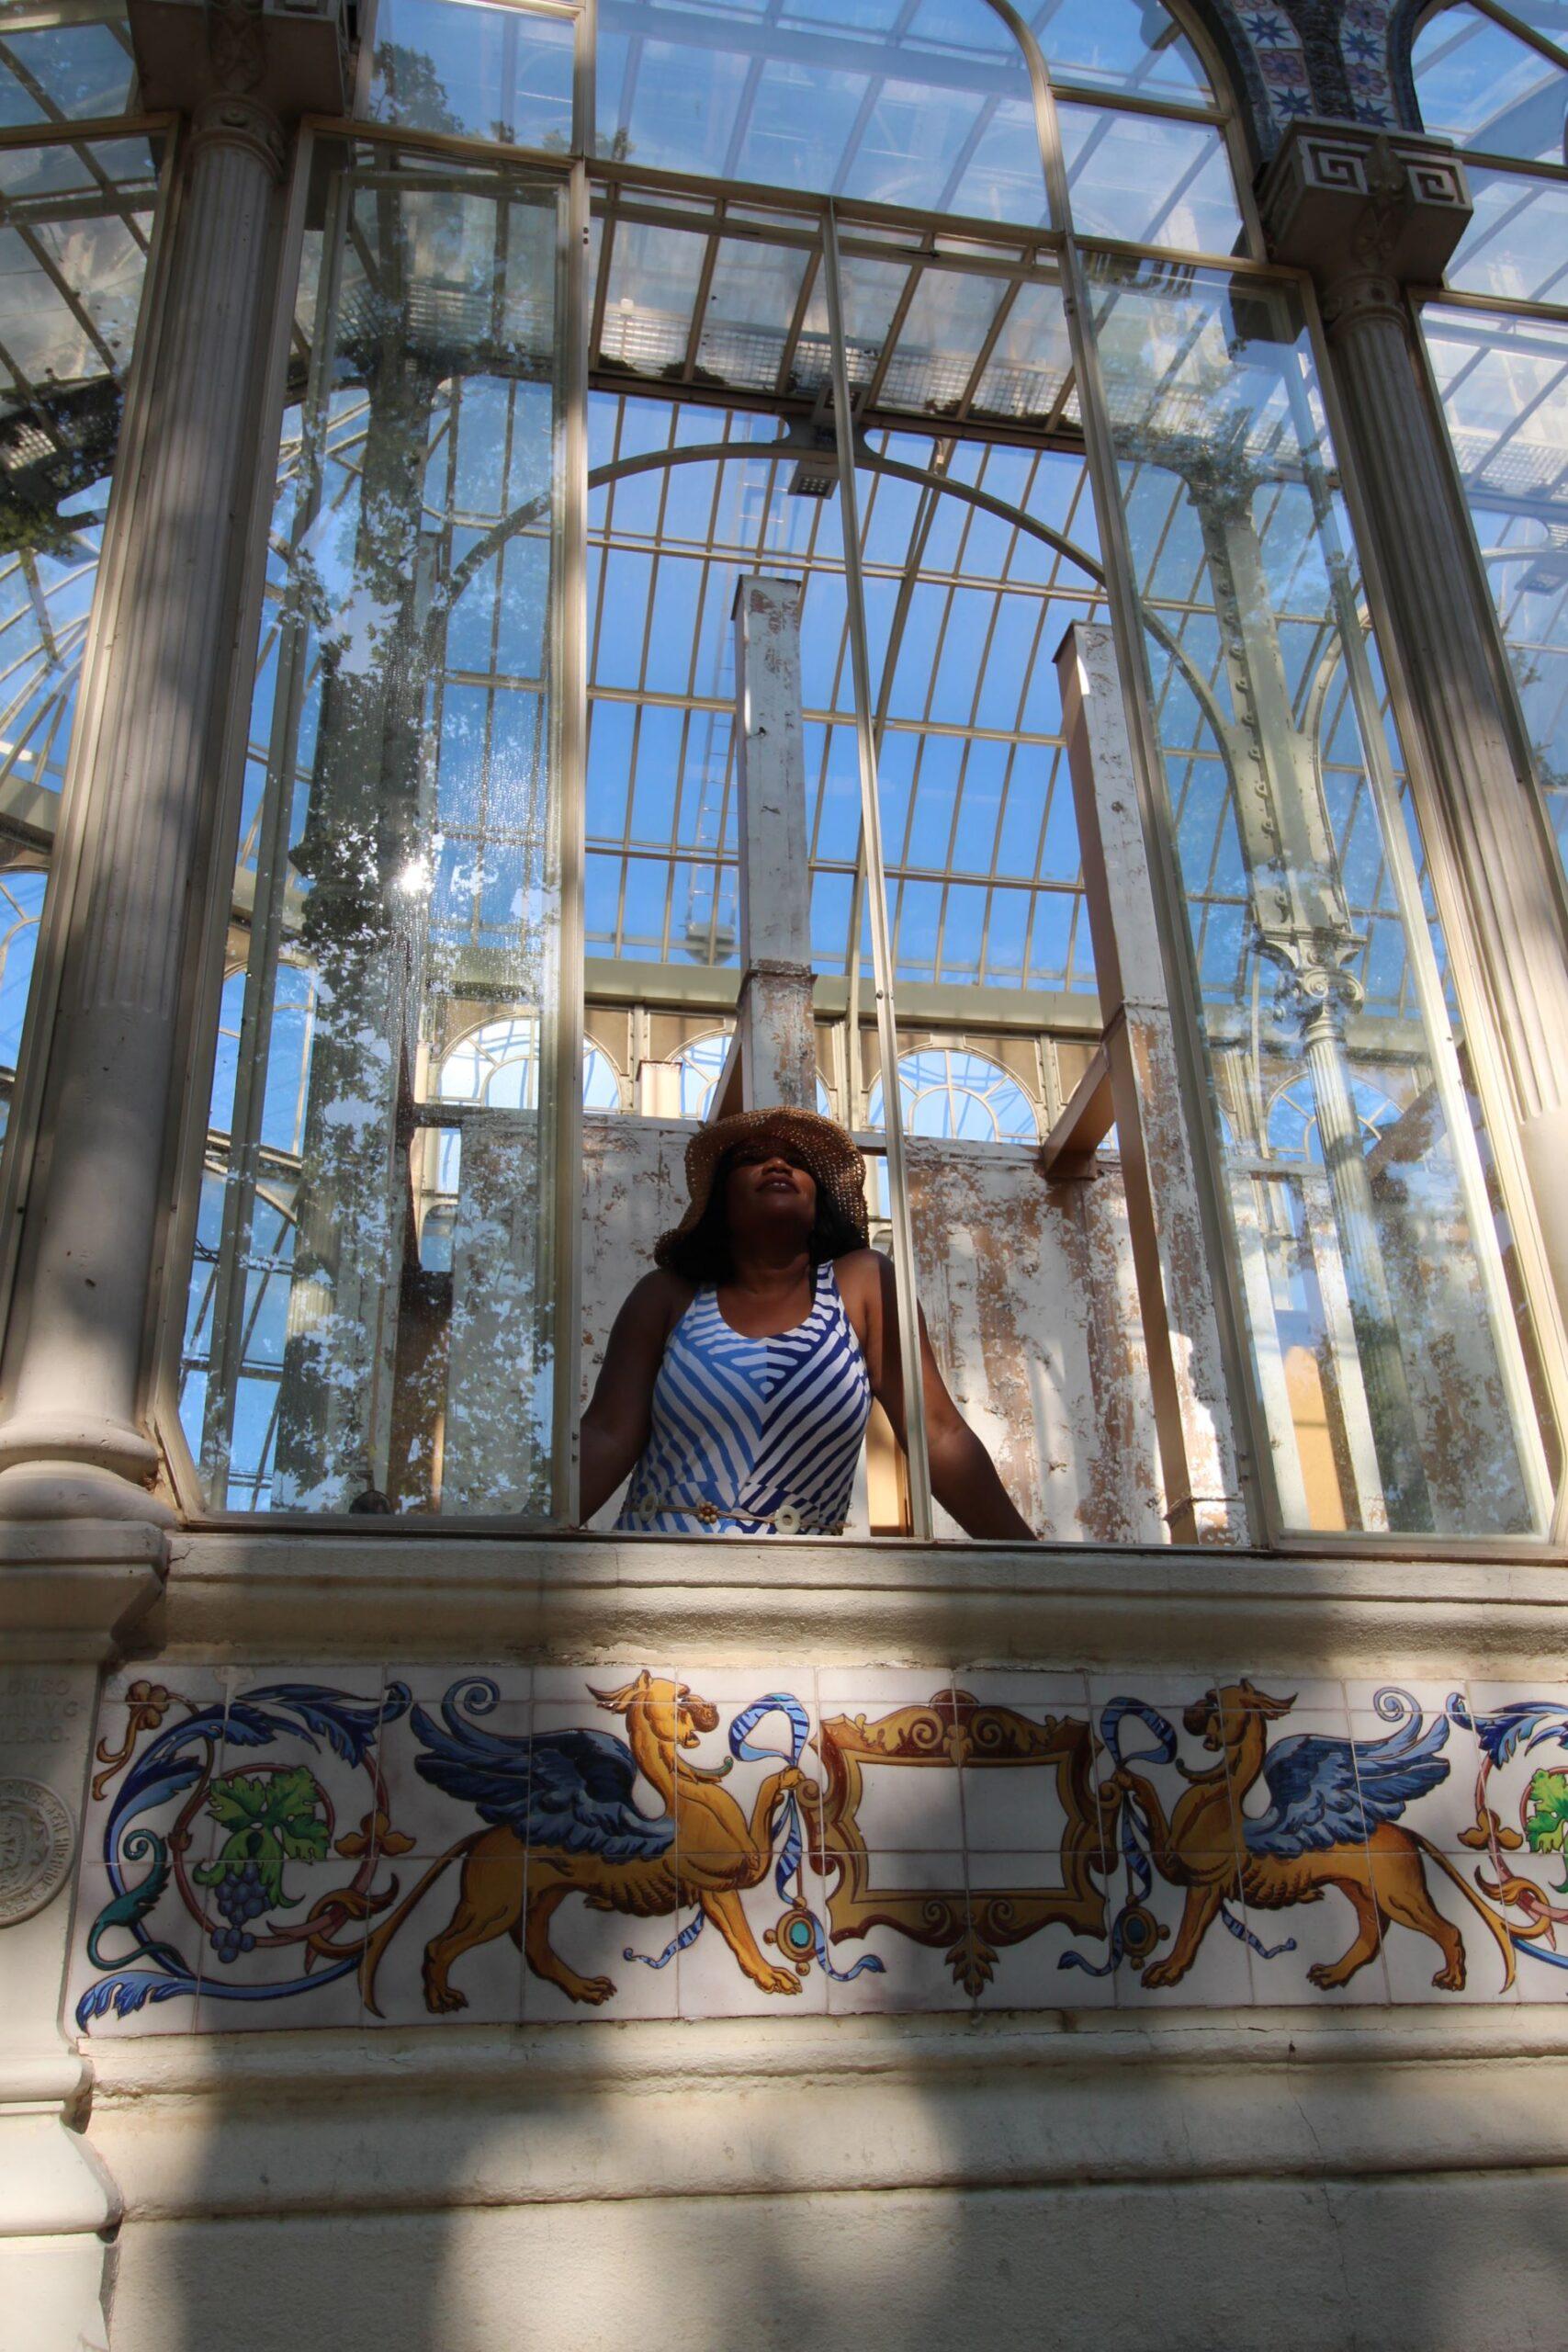 Monique Abbott at the Glass Palace, Madrid, Spain